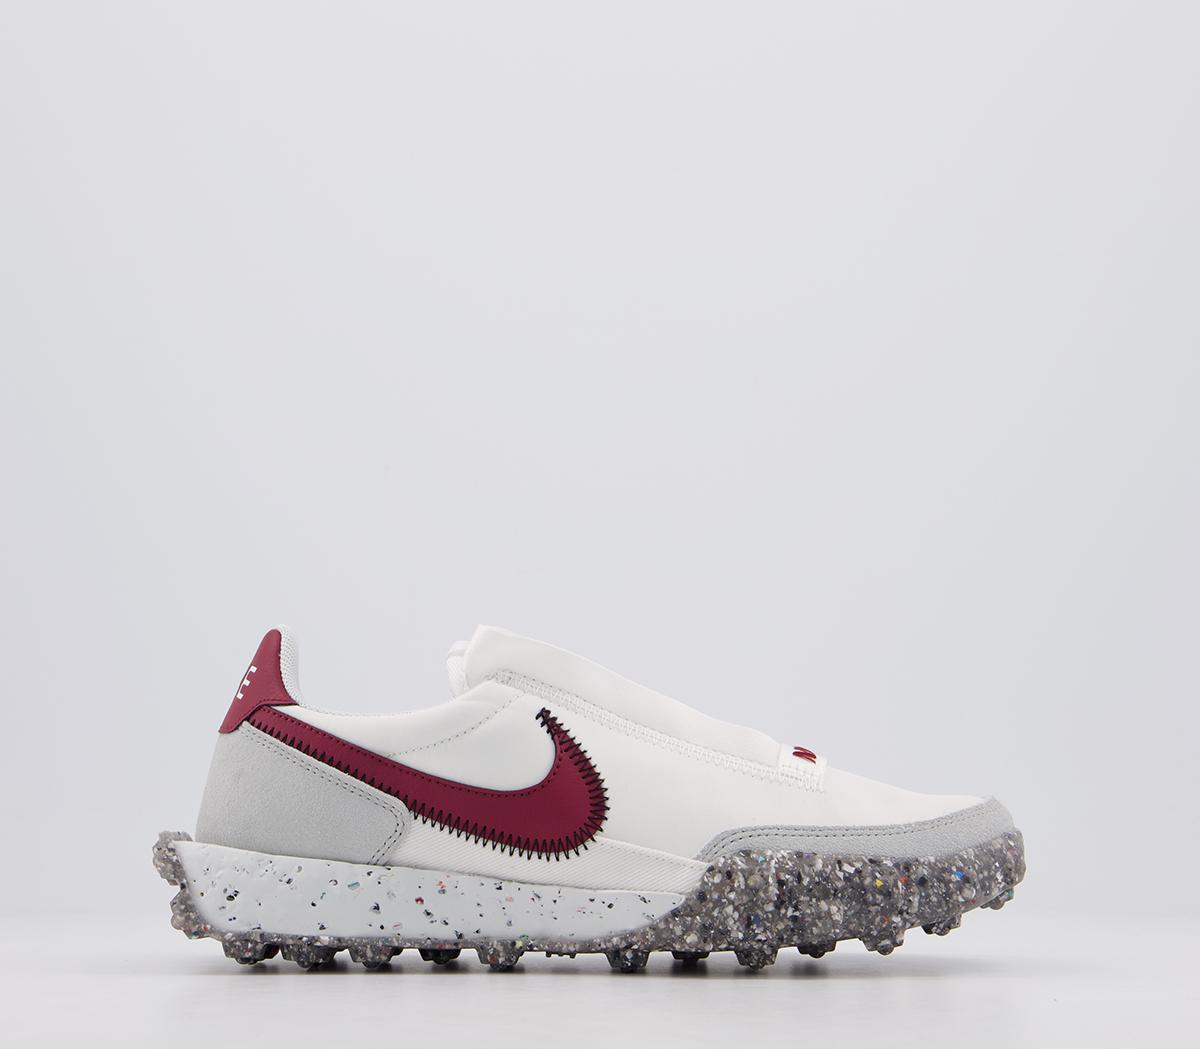 NikeWaffle Racer Crater TrainersSummit White Team Red Photon Dust Black White